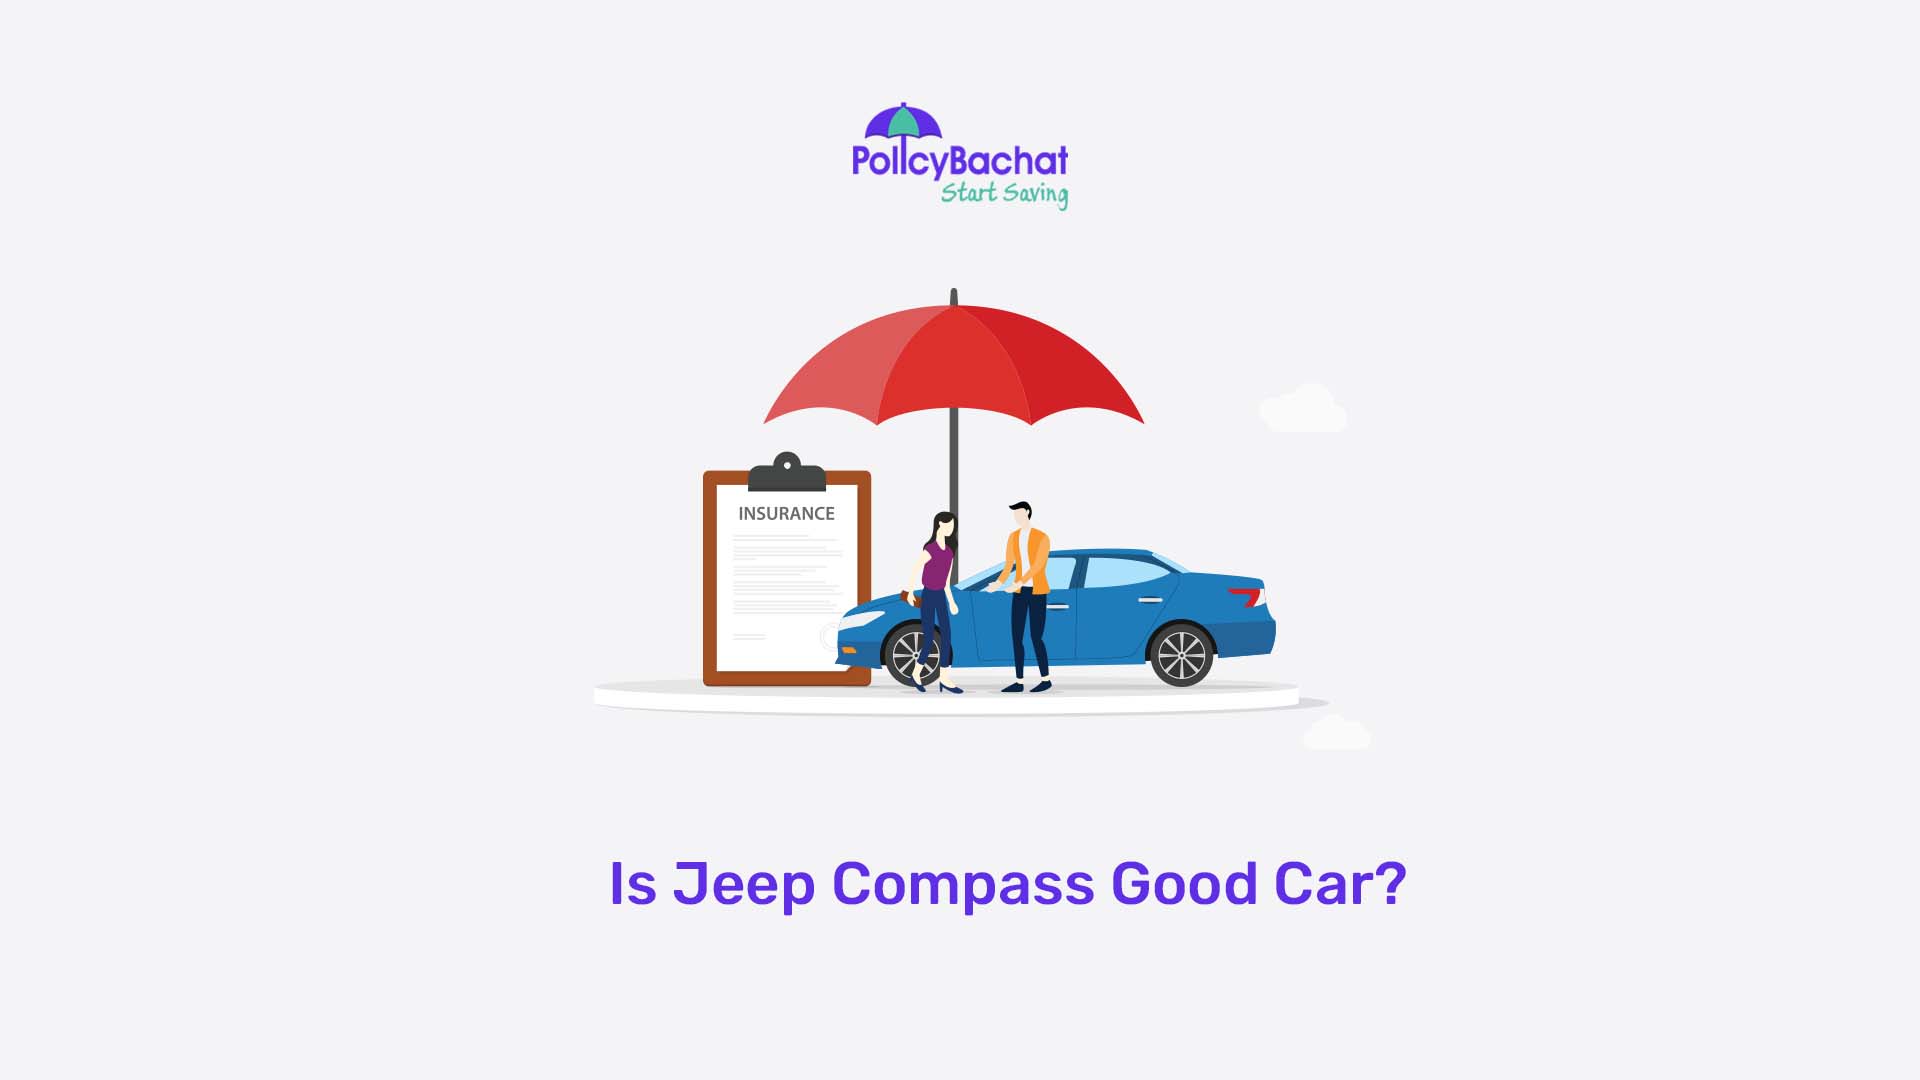 is-jeep-compass-good-car-policybachat